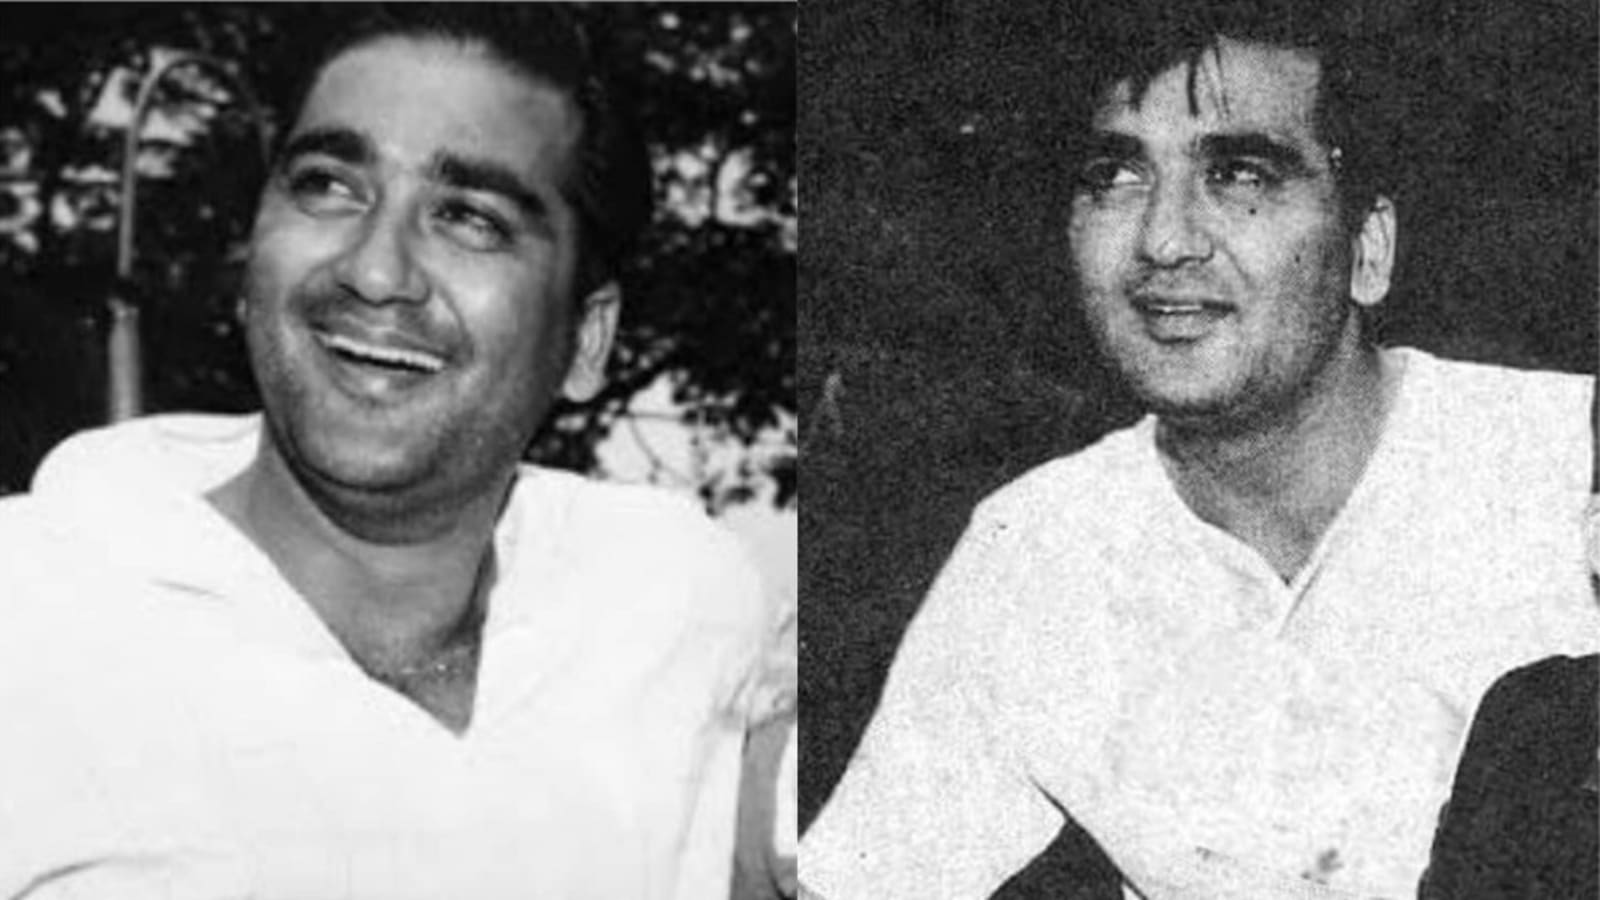 Pornsex Of Nargis Dutt - When Sunil Dutt recalled how his family was saved by Muslim man during  Partition | Bollywood - Hindustan Times